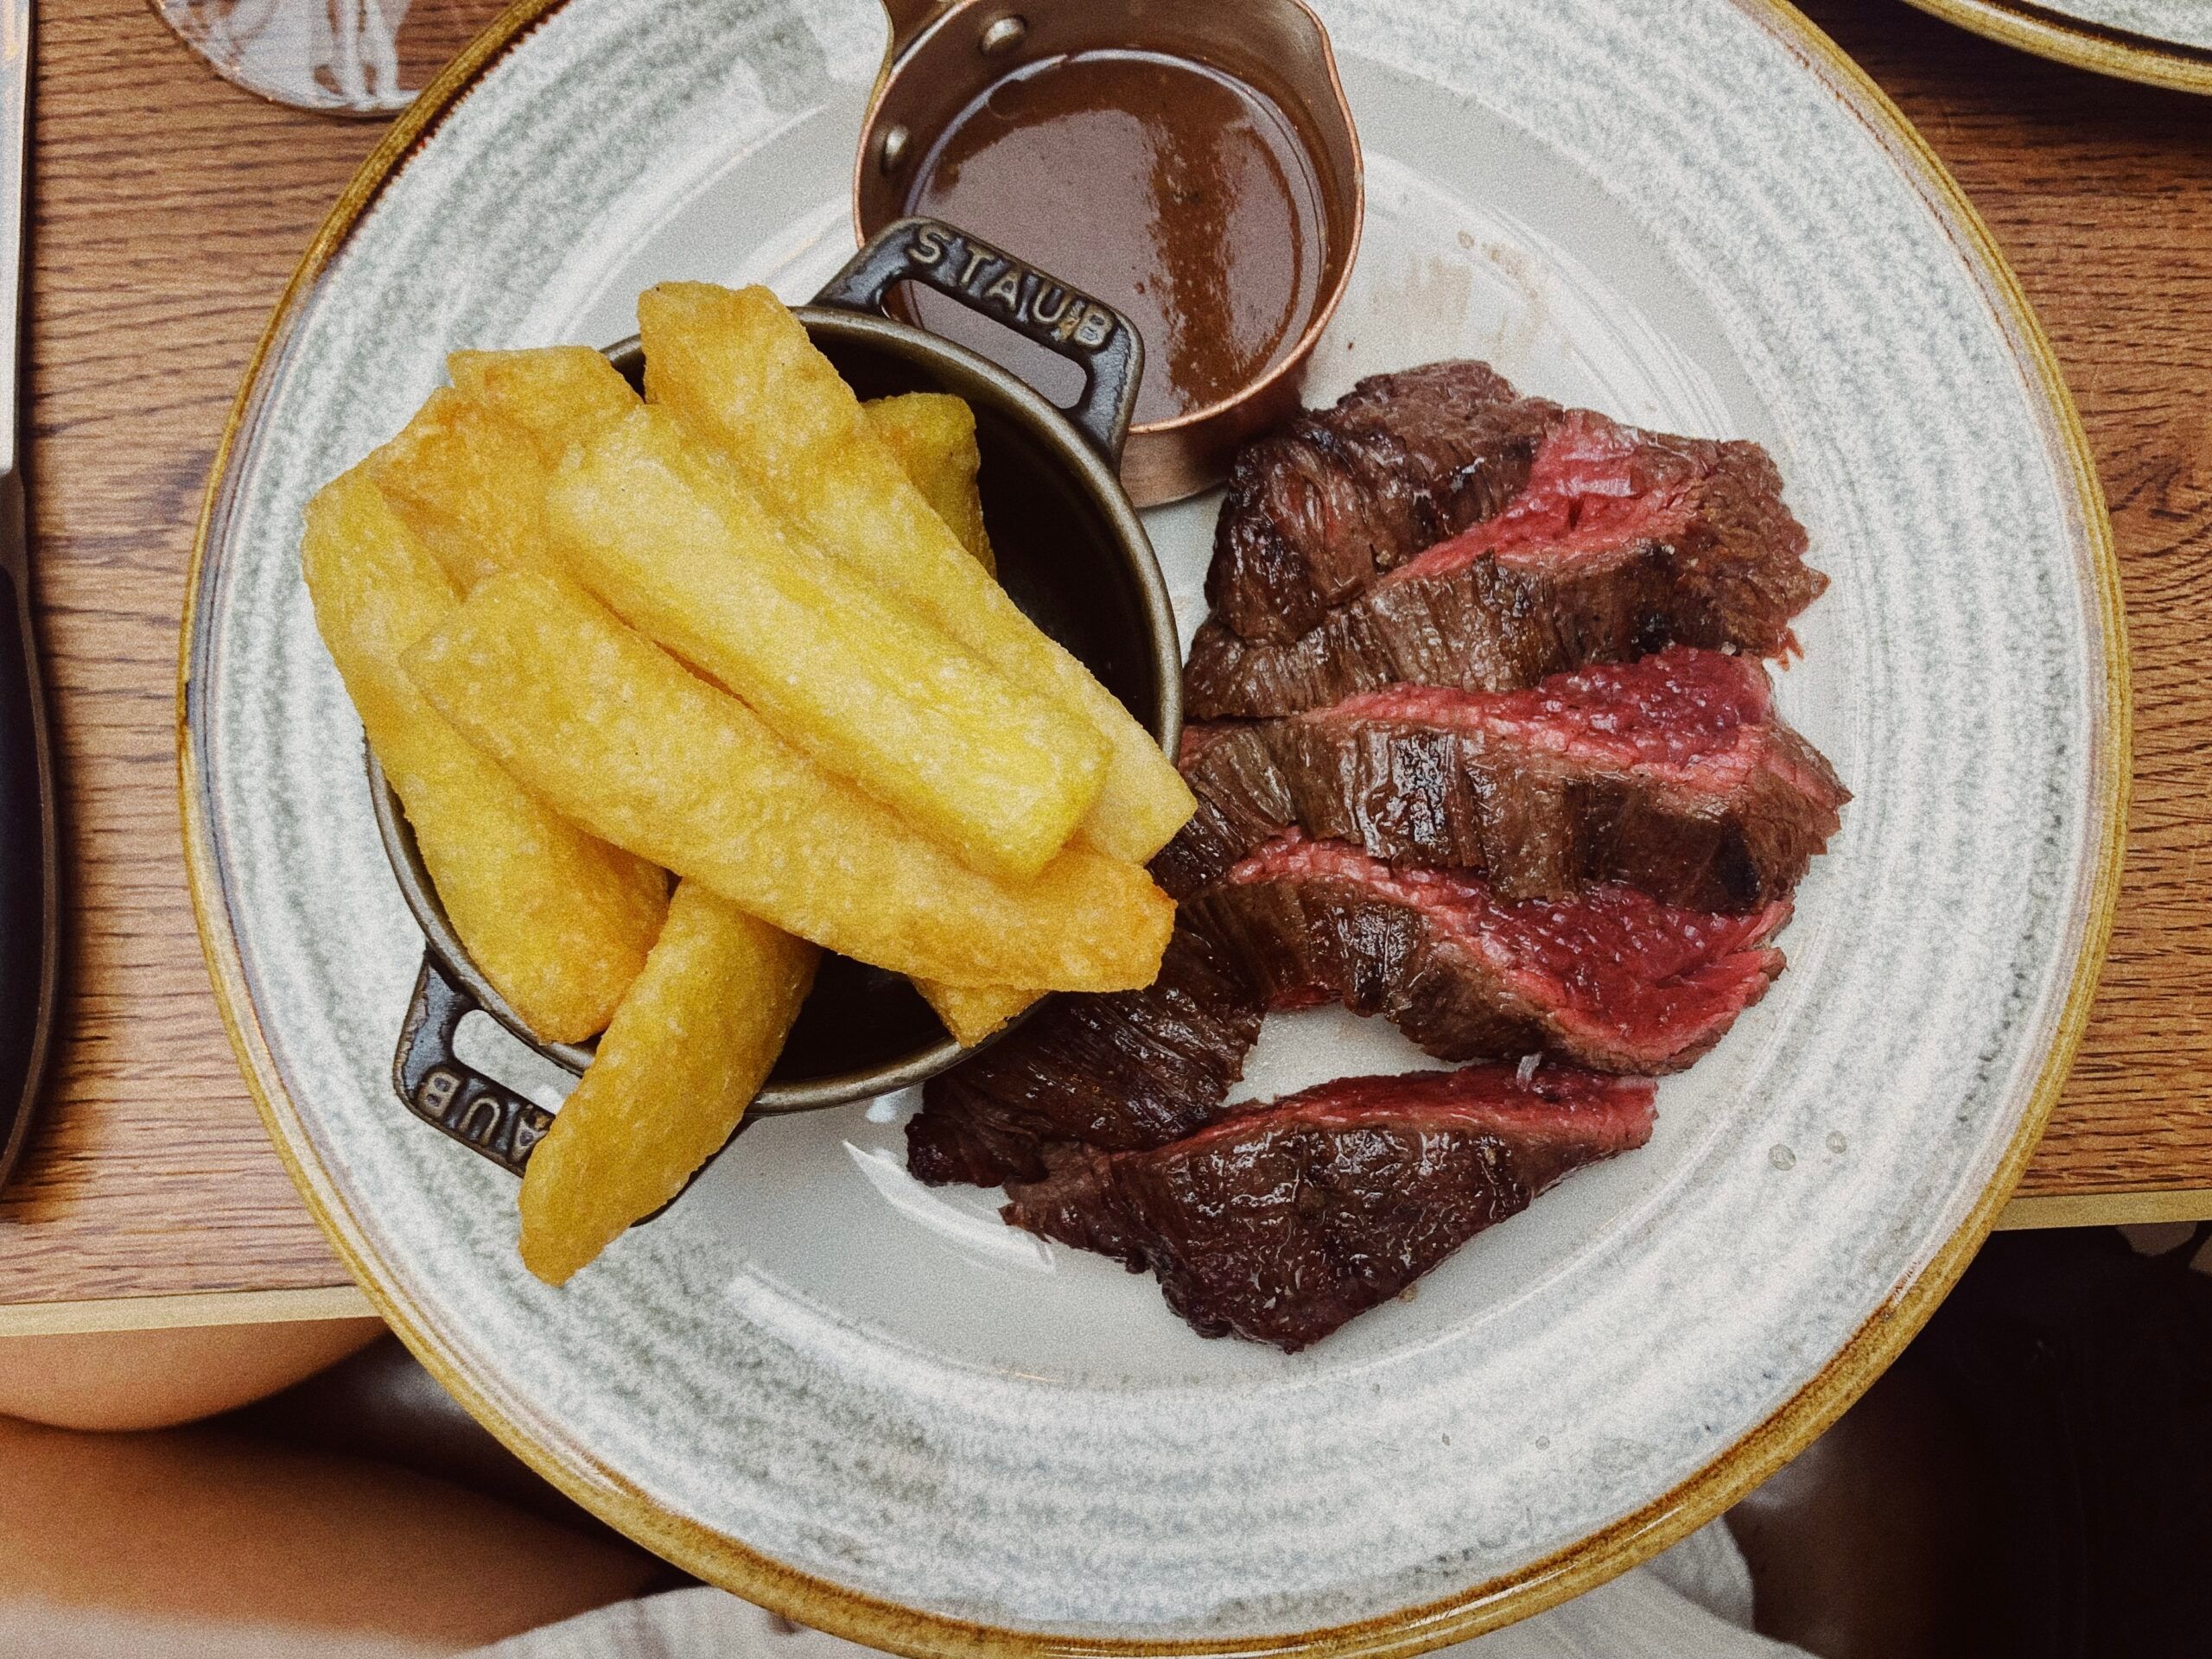 Express Lunch Brighton. Steak and chips, lunchtime express menu at The Coal Shed steak restaurant in Brighton. 